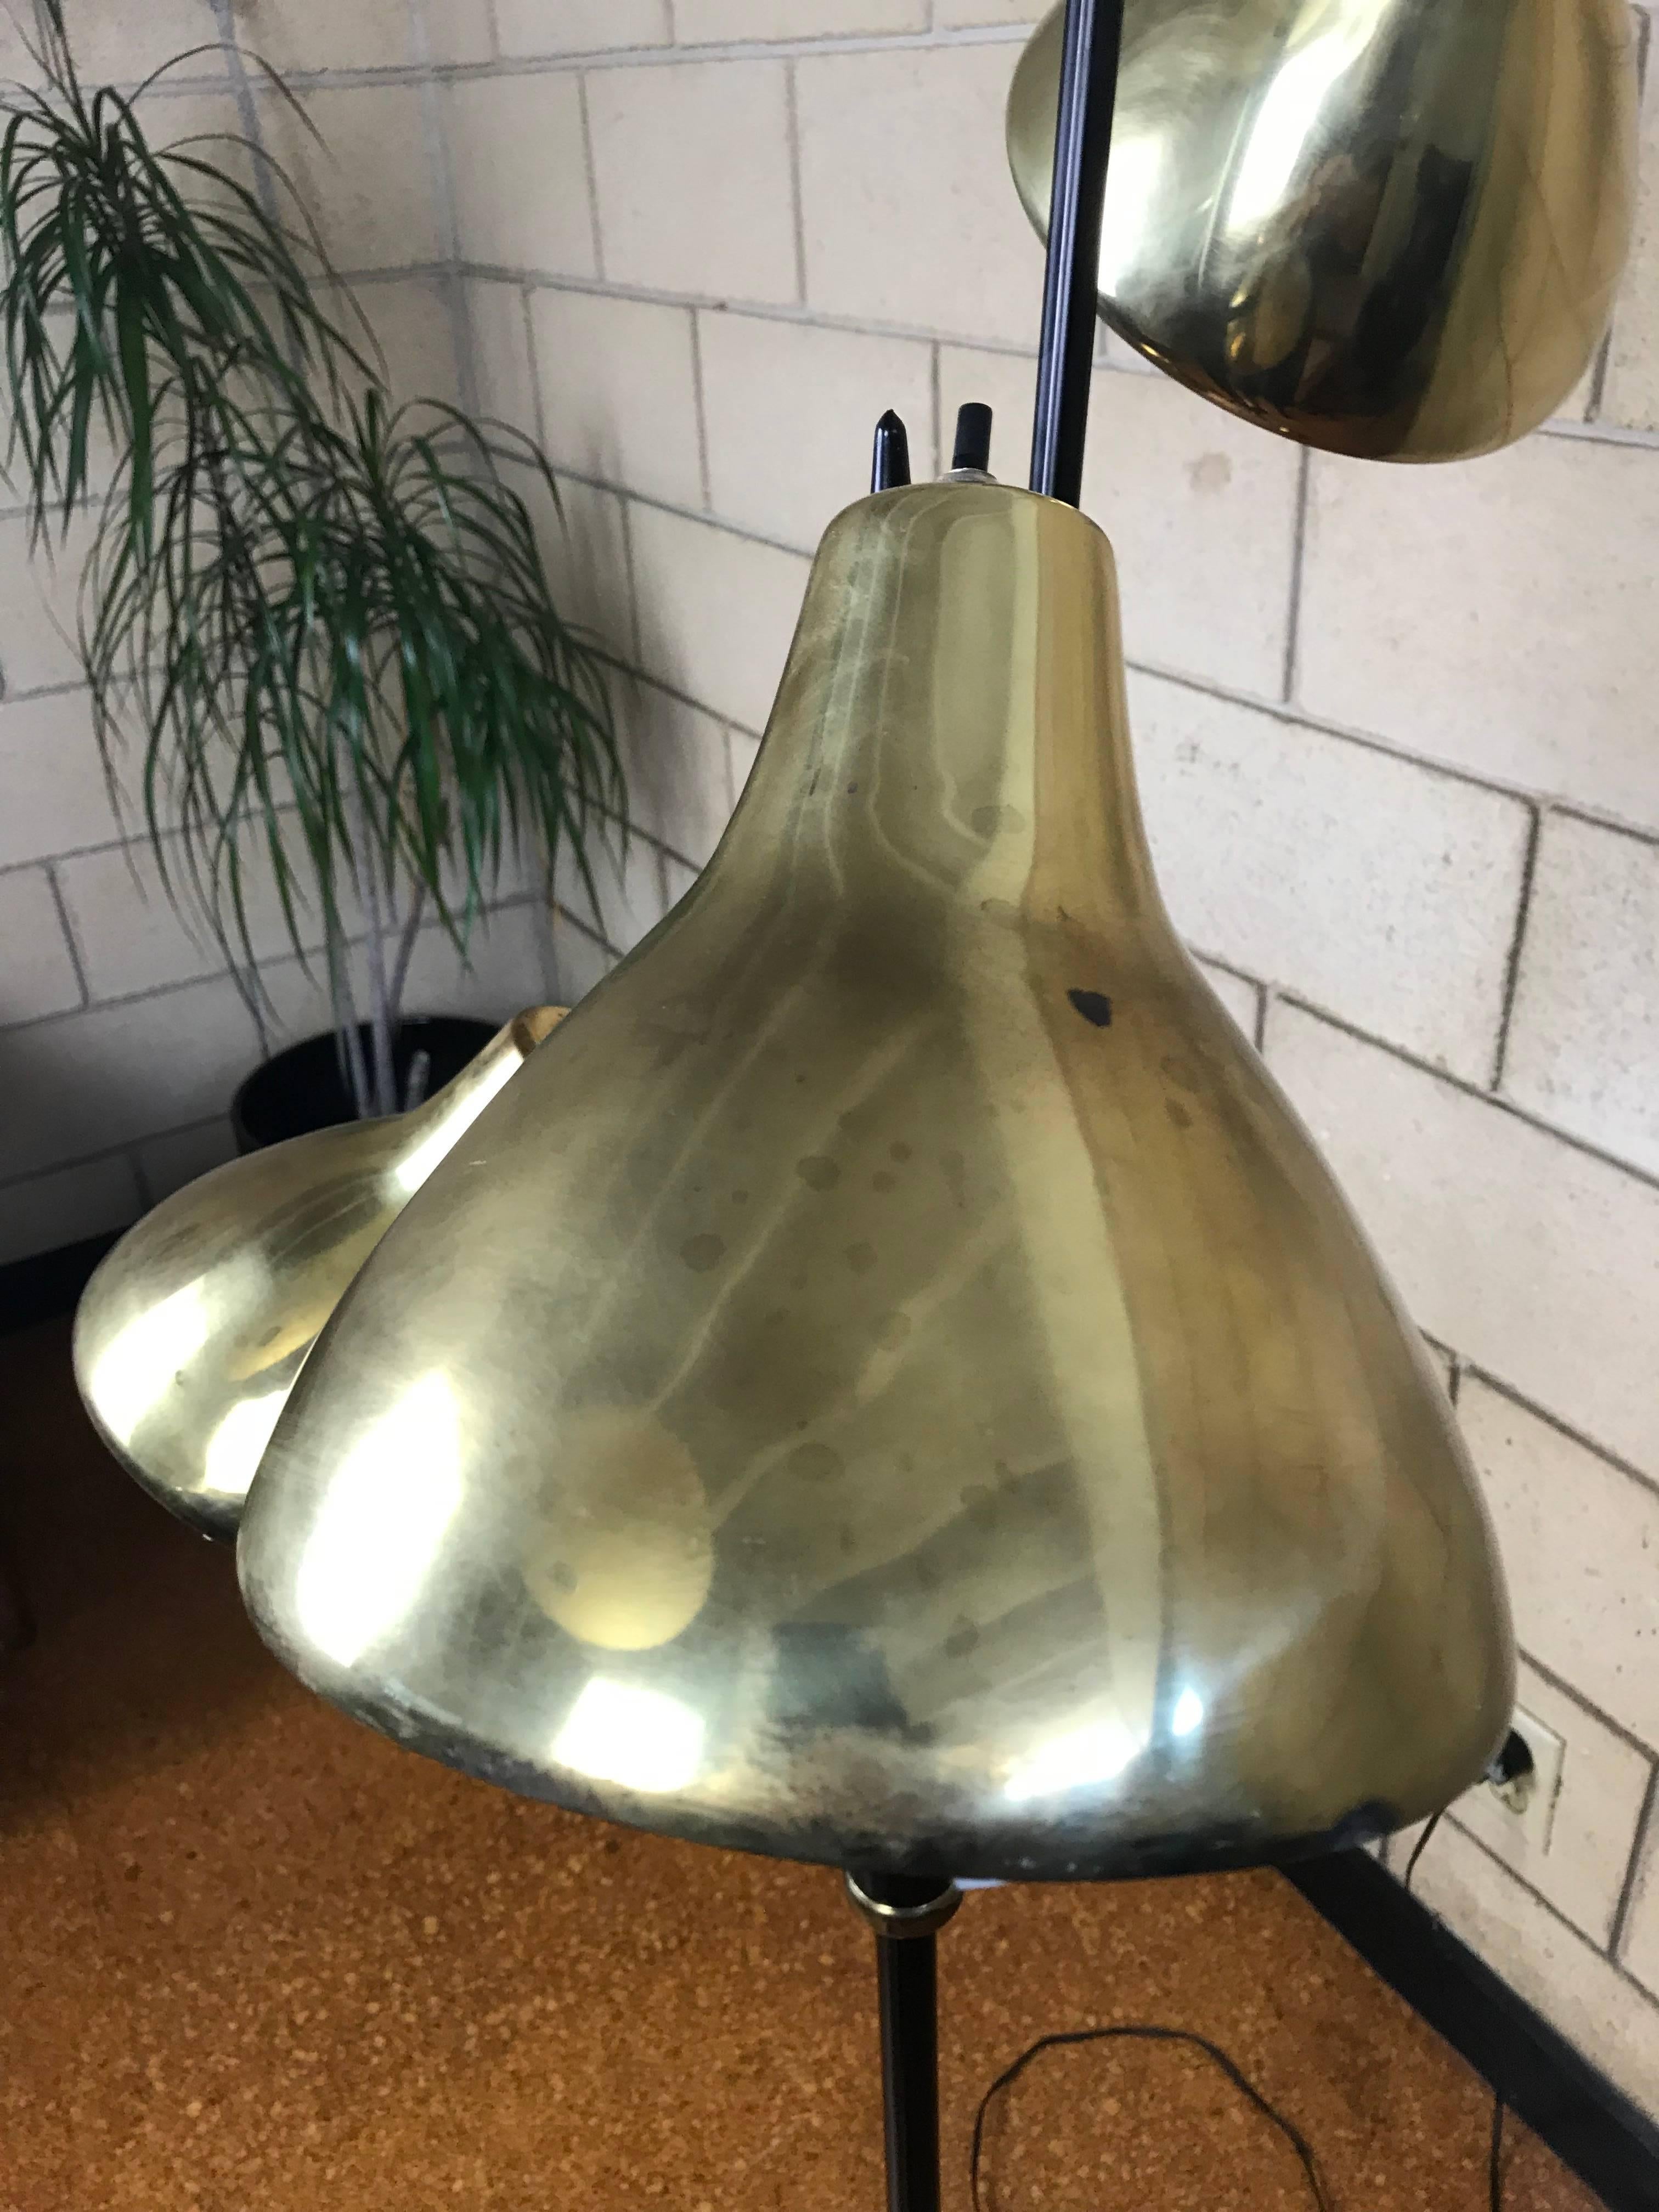 Wonderful and original three shade floor lamp designed by Gerald Thurston for Lightolier. This lamp is in original condition and each shade is movable and they have their original nautilus style diffusers which is very rare. The brass shades do show